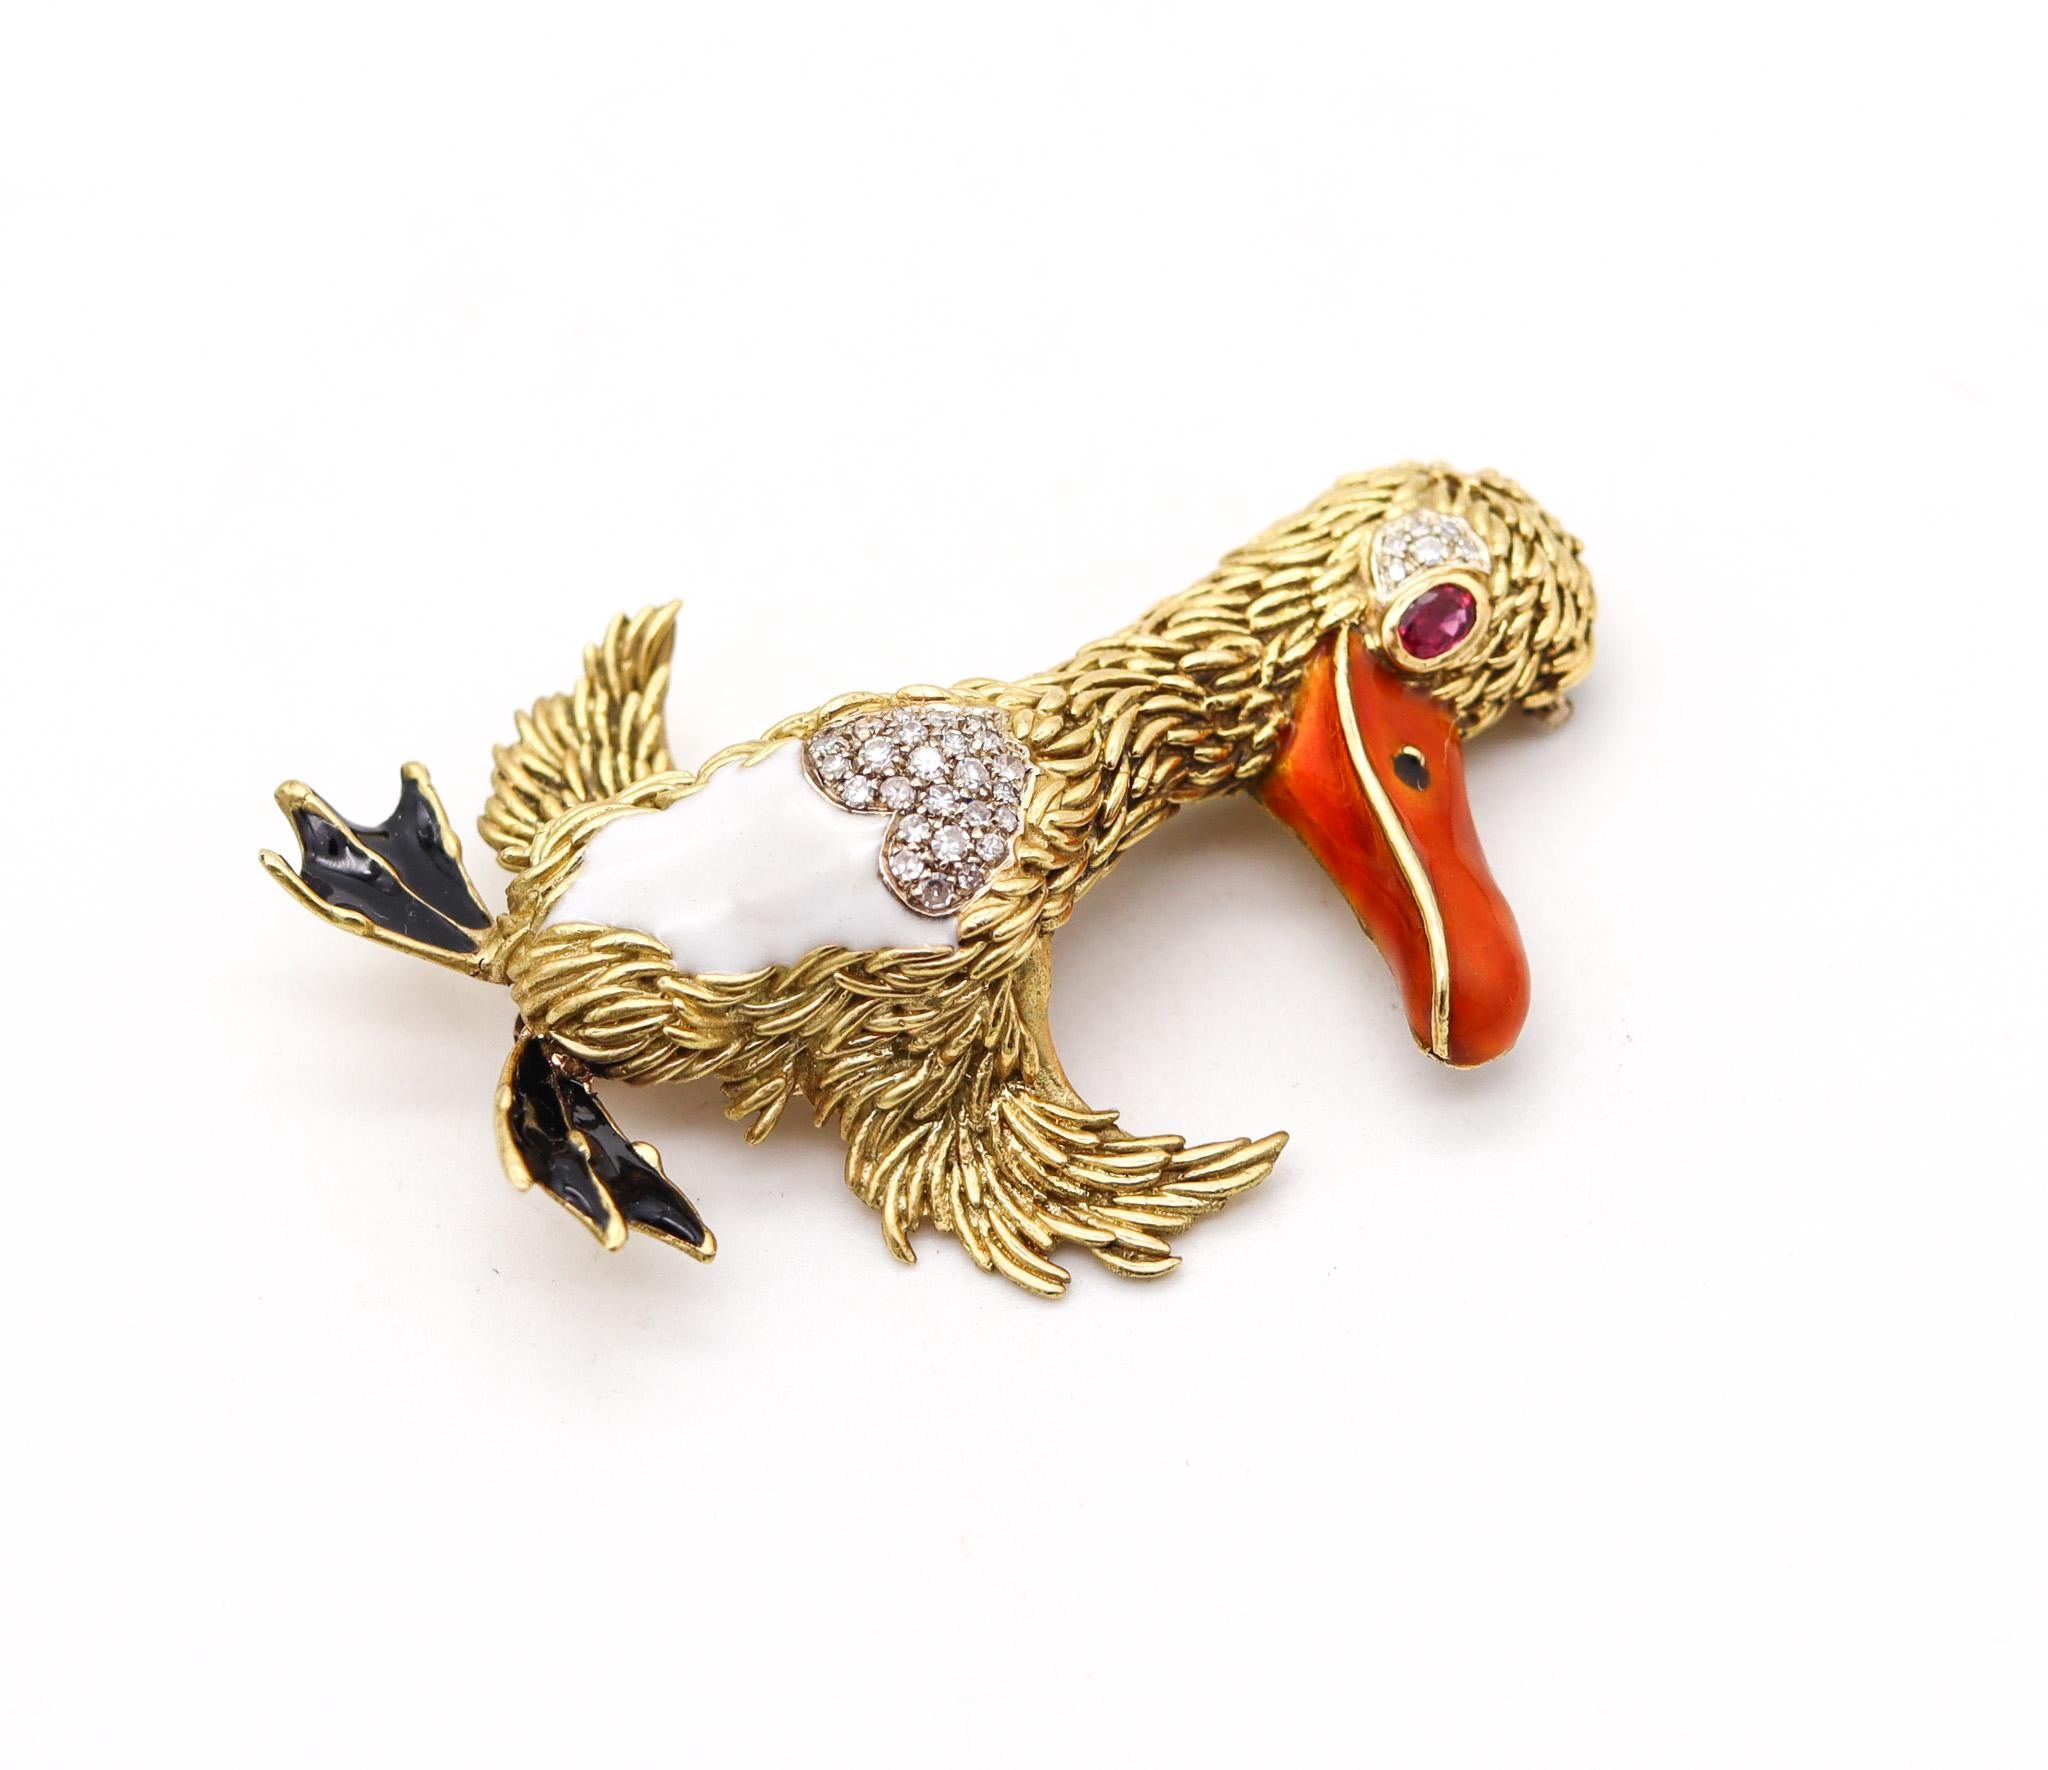 Pelican brooch designed by Frascarolo.

A beautiful brooch, created in Milano Italy by the famed Italian jeweler and designer Pierino Frascarolo. This impressive piece is highly sculpted and was from his bestiary collection designed during the